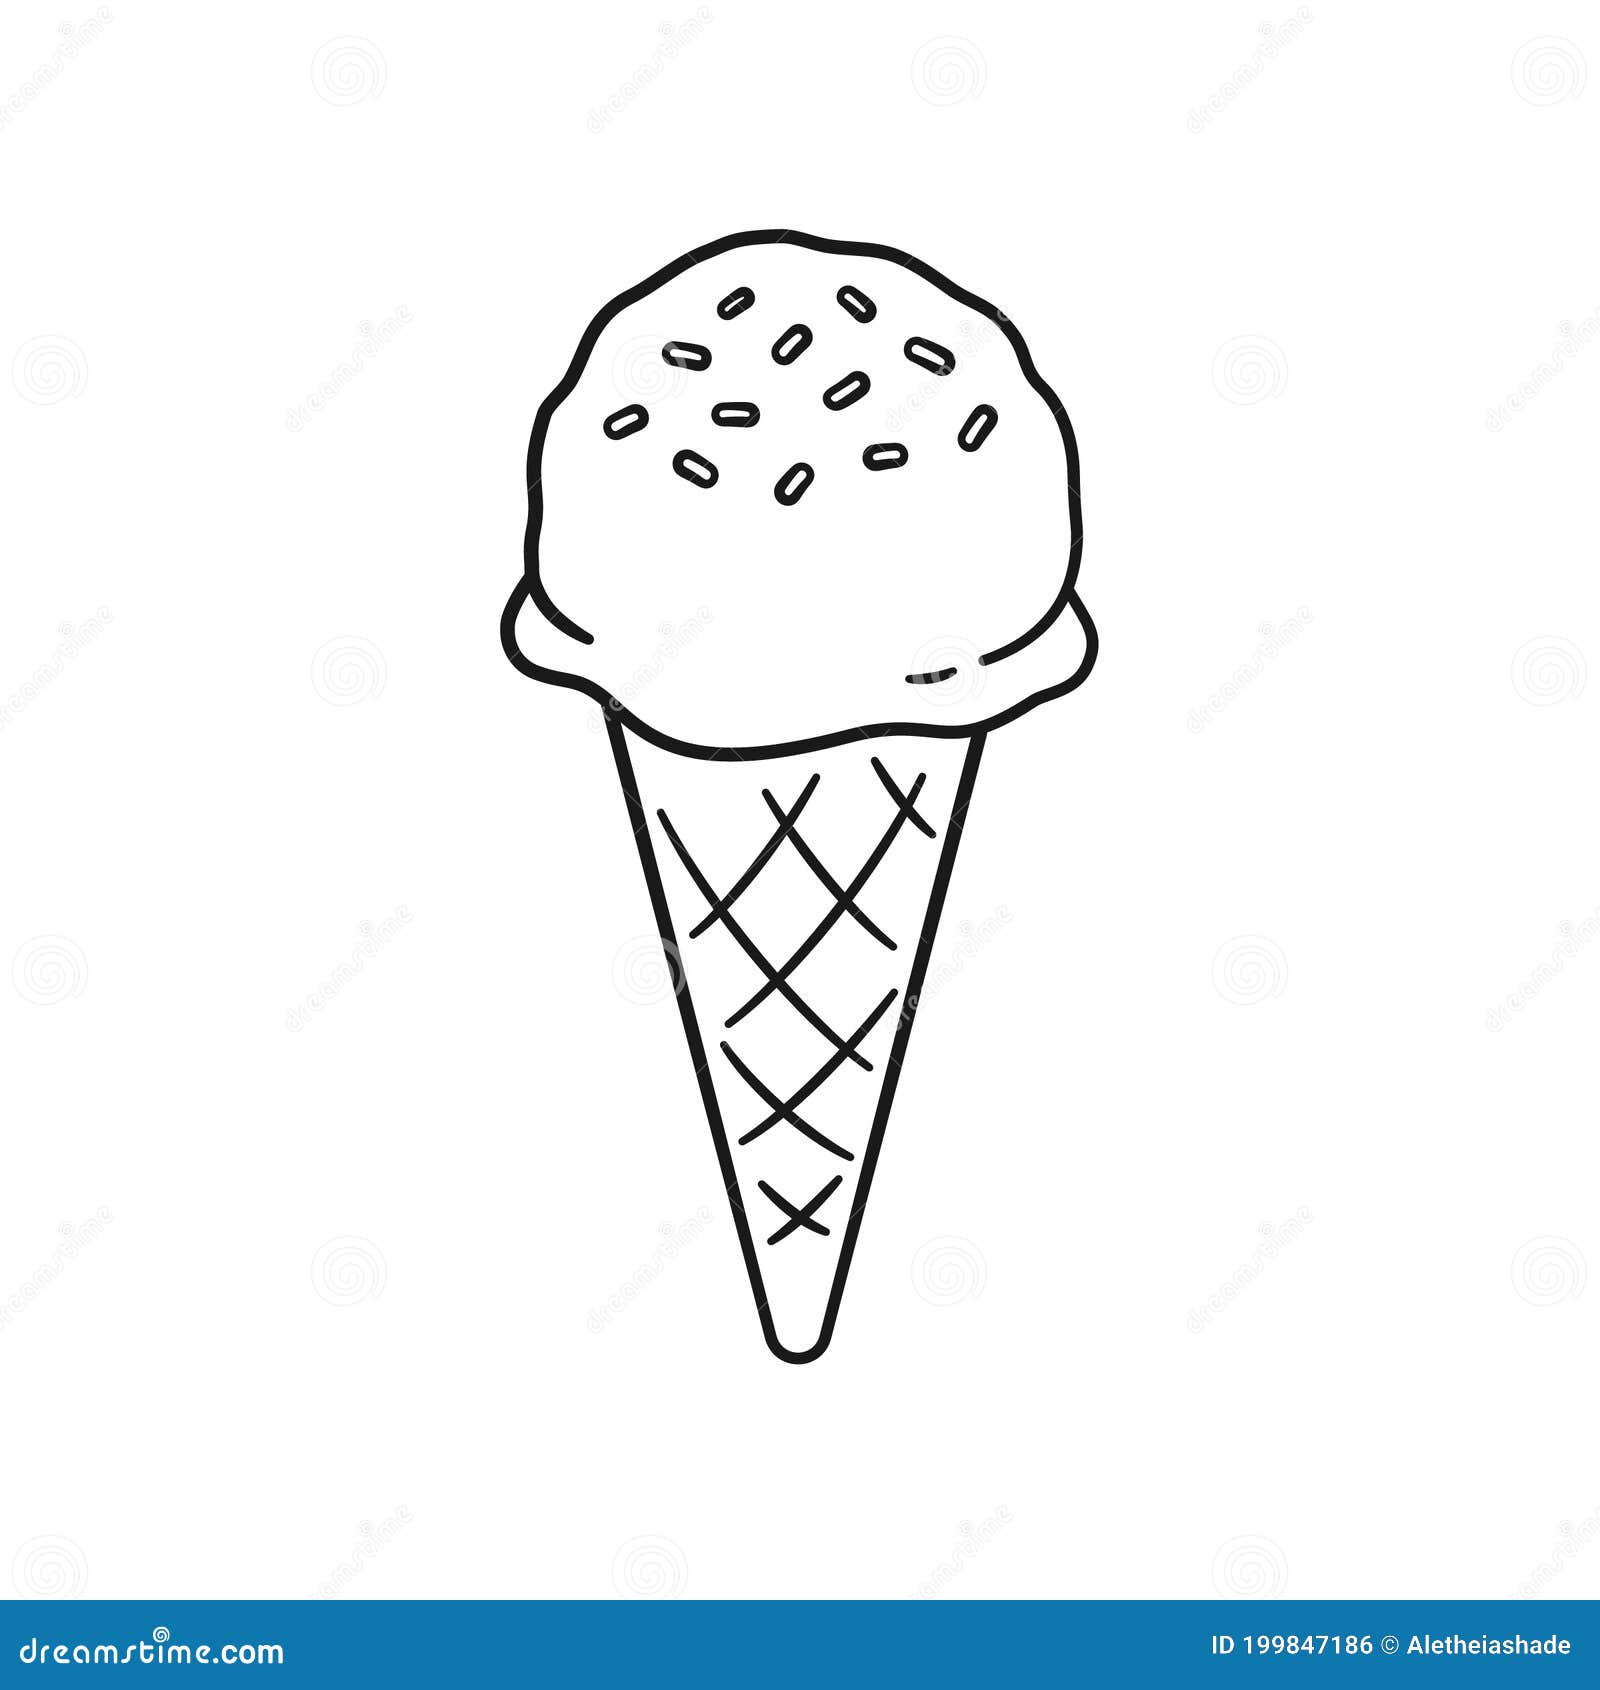 Single Scoop Ice Cream With Sprinkles On Sugar Cone Line Art Outline Cartoon Illustration Stock Vector Illustration Of Printable Color 199847186